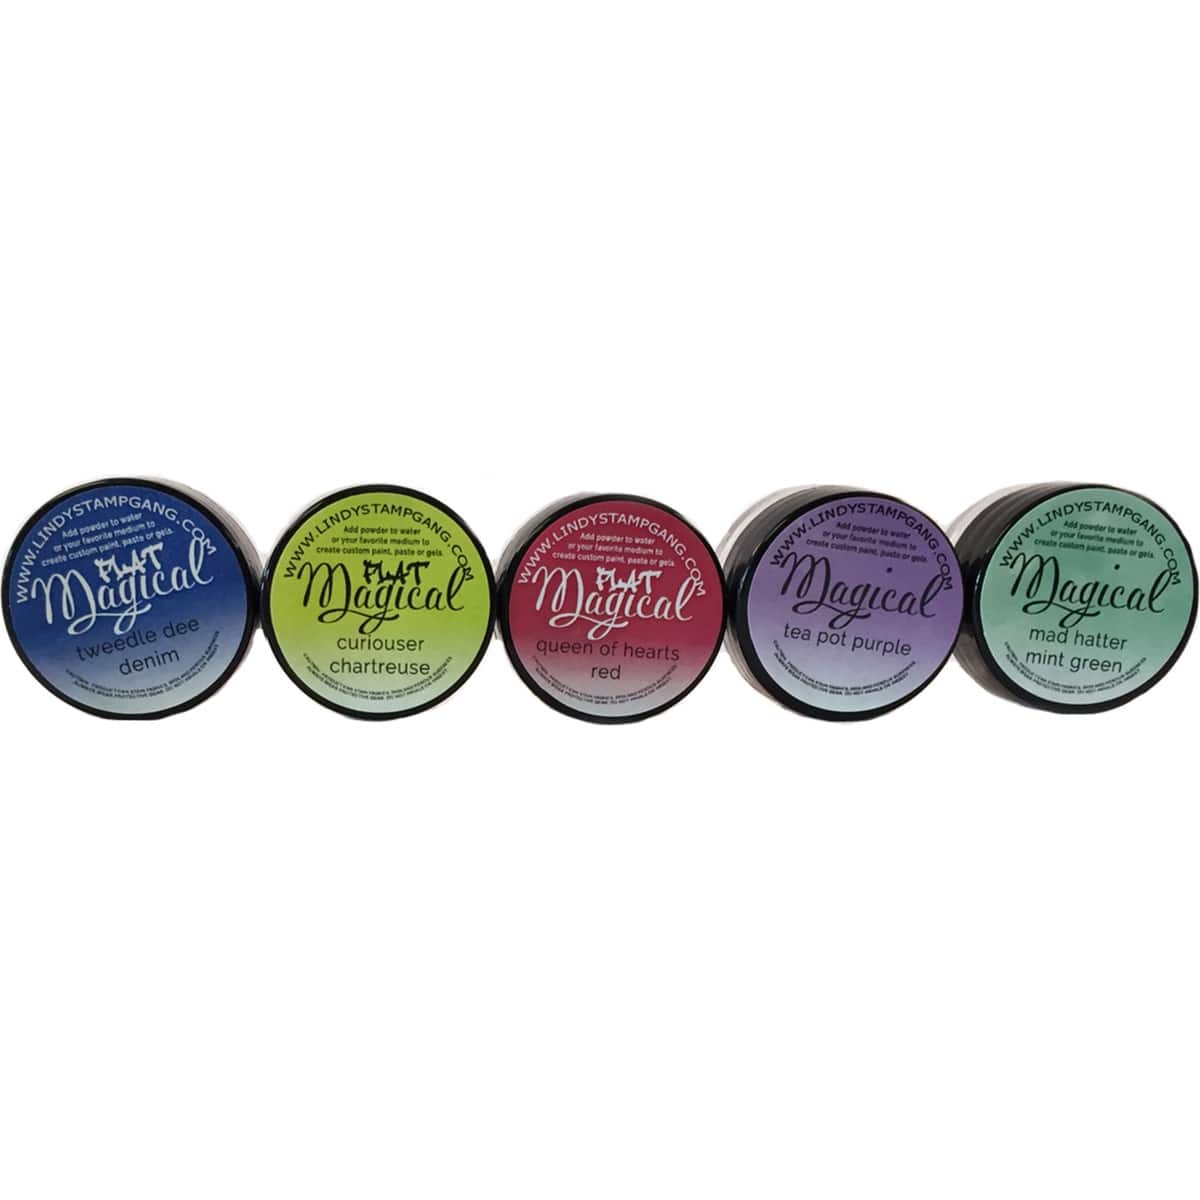 Lindy&#x27;s Stamp Gang&#xAE; Mad Hatter Magicals, 0.25 oz.